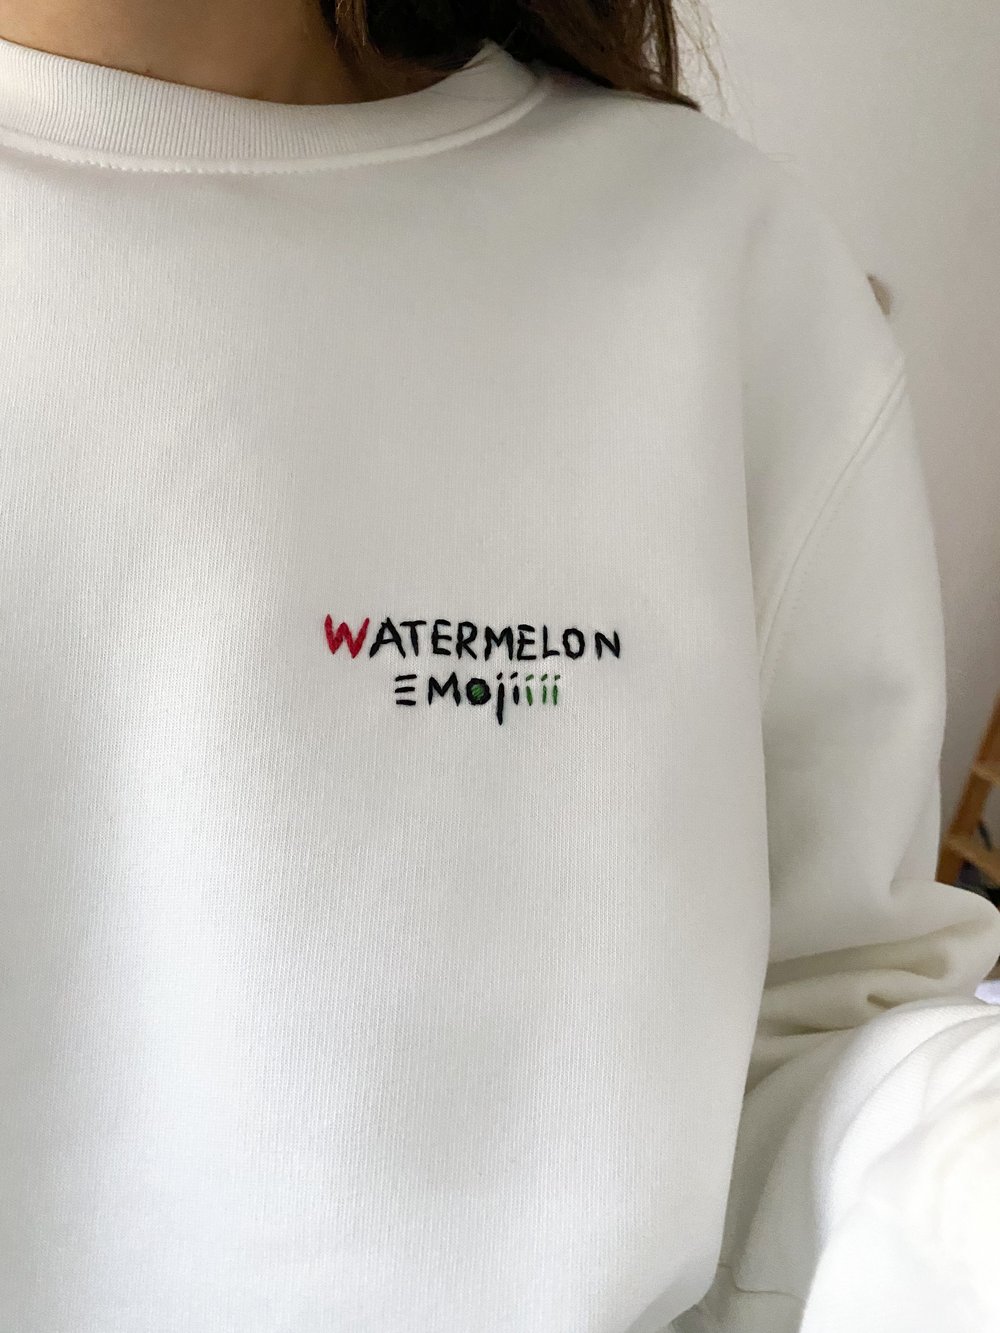 Image of Watermelon emoji - hand embroidered sweatshirt, available in all sizes, unisex, organic cotton